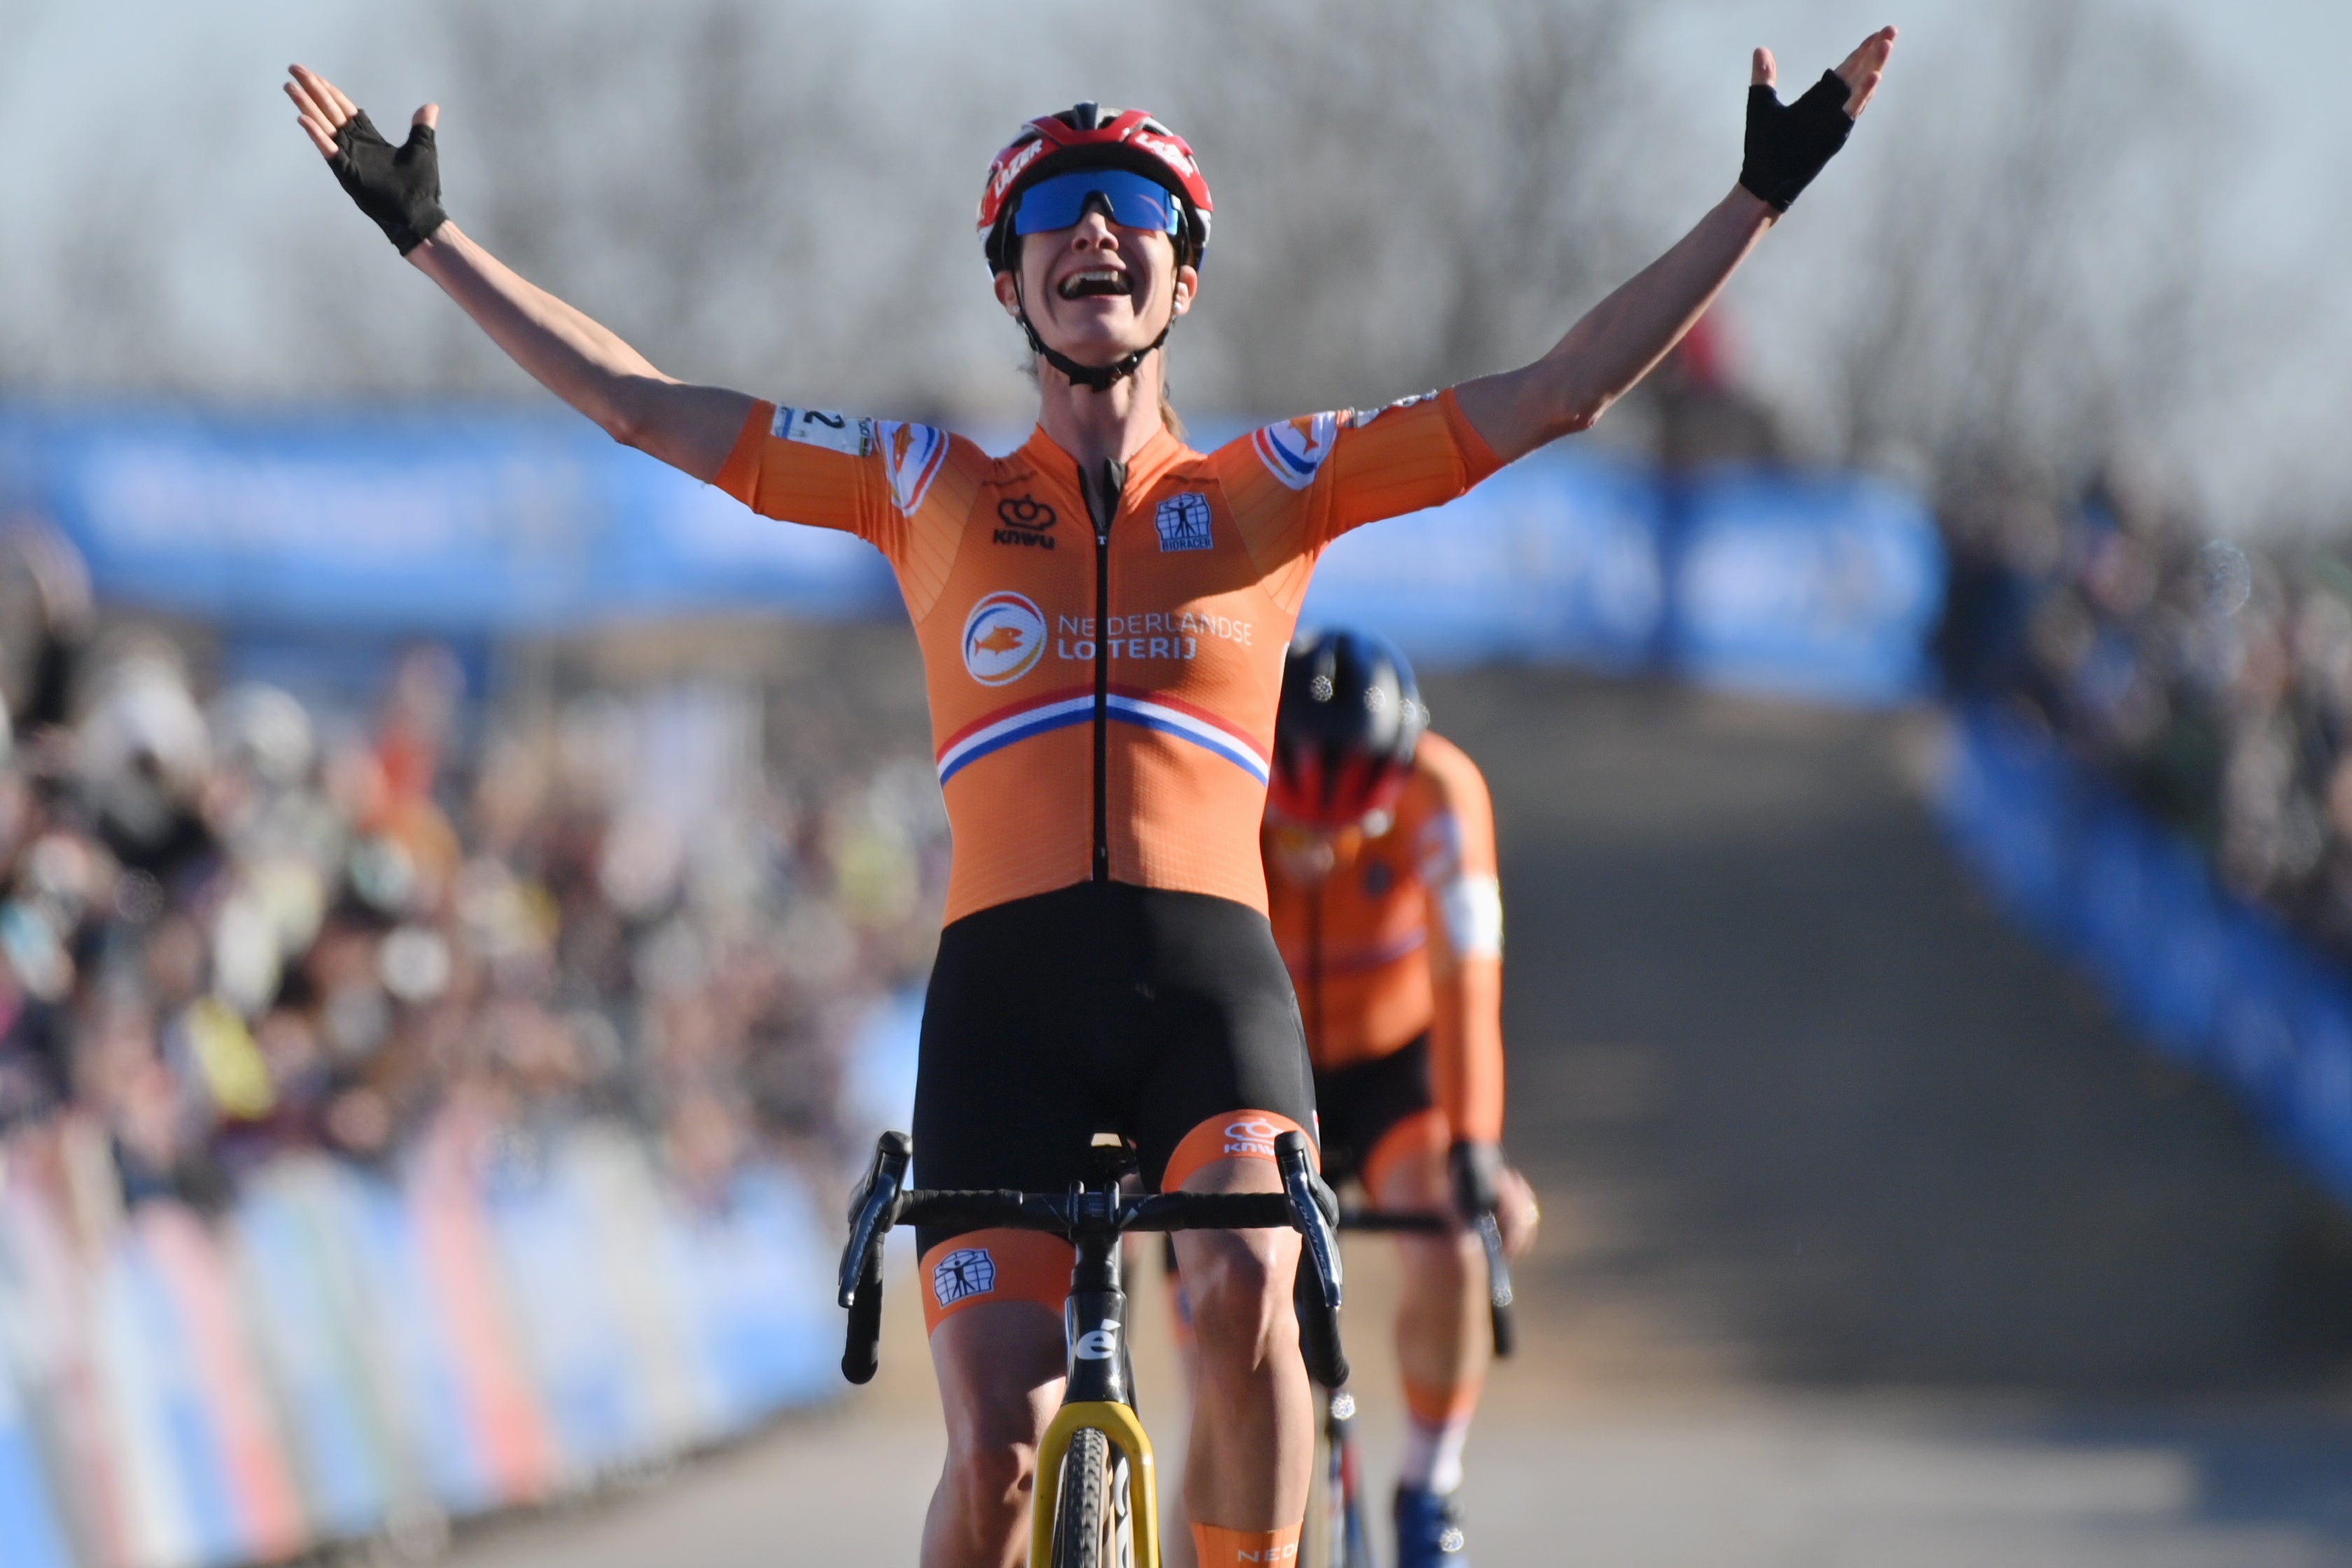 Marianne Vos is one of the contenders for glory